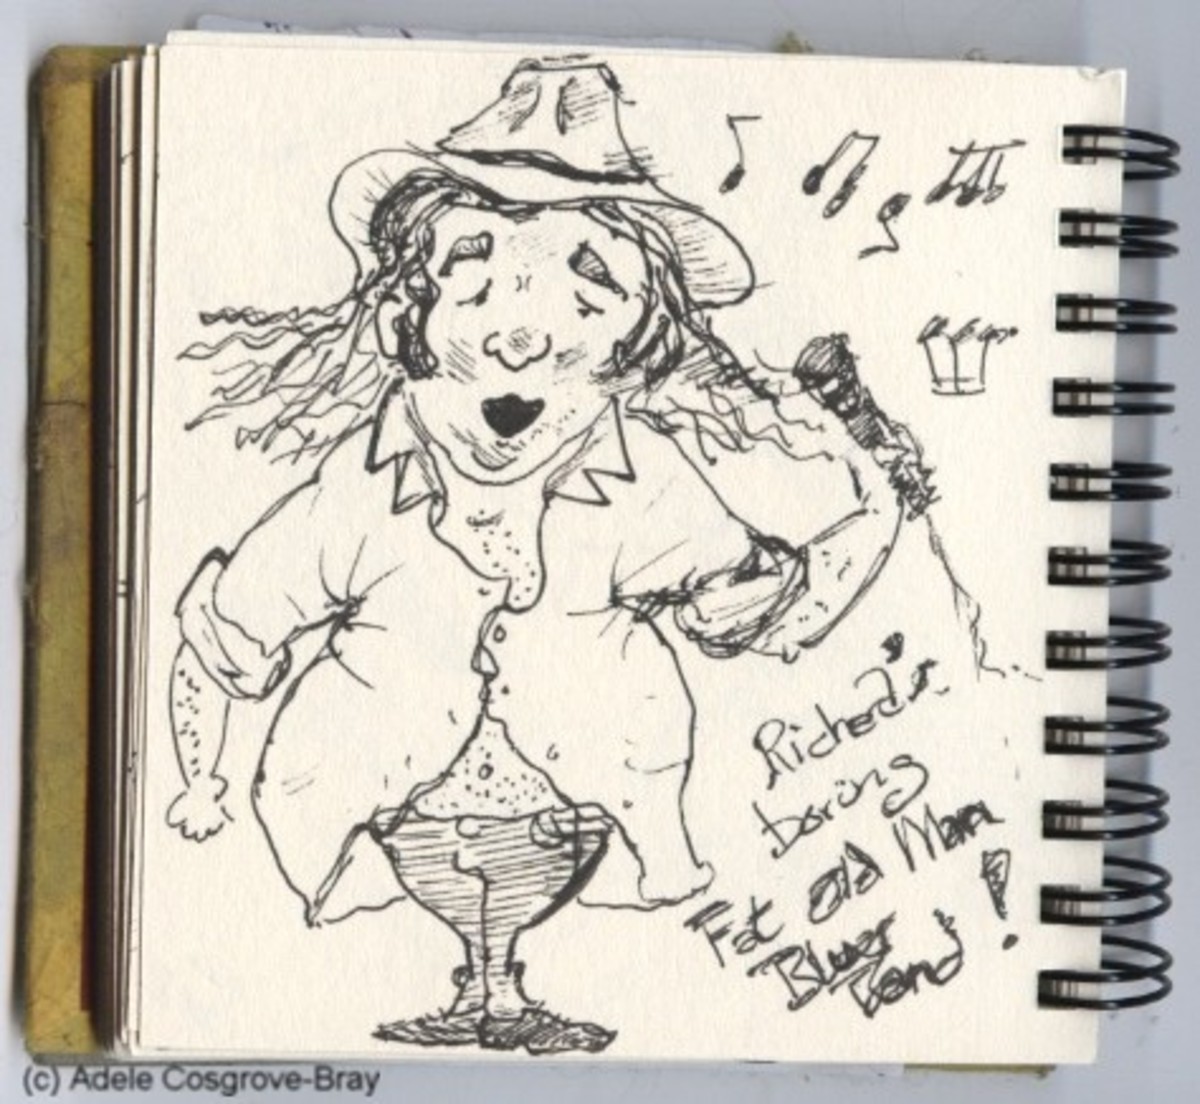 Sketches don't have to be serious. This ink drawing pokes fun at hubby's taste in music.